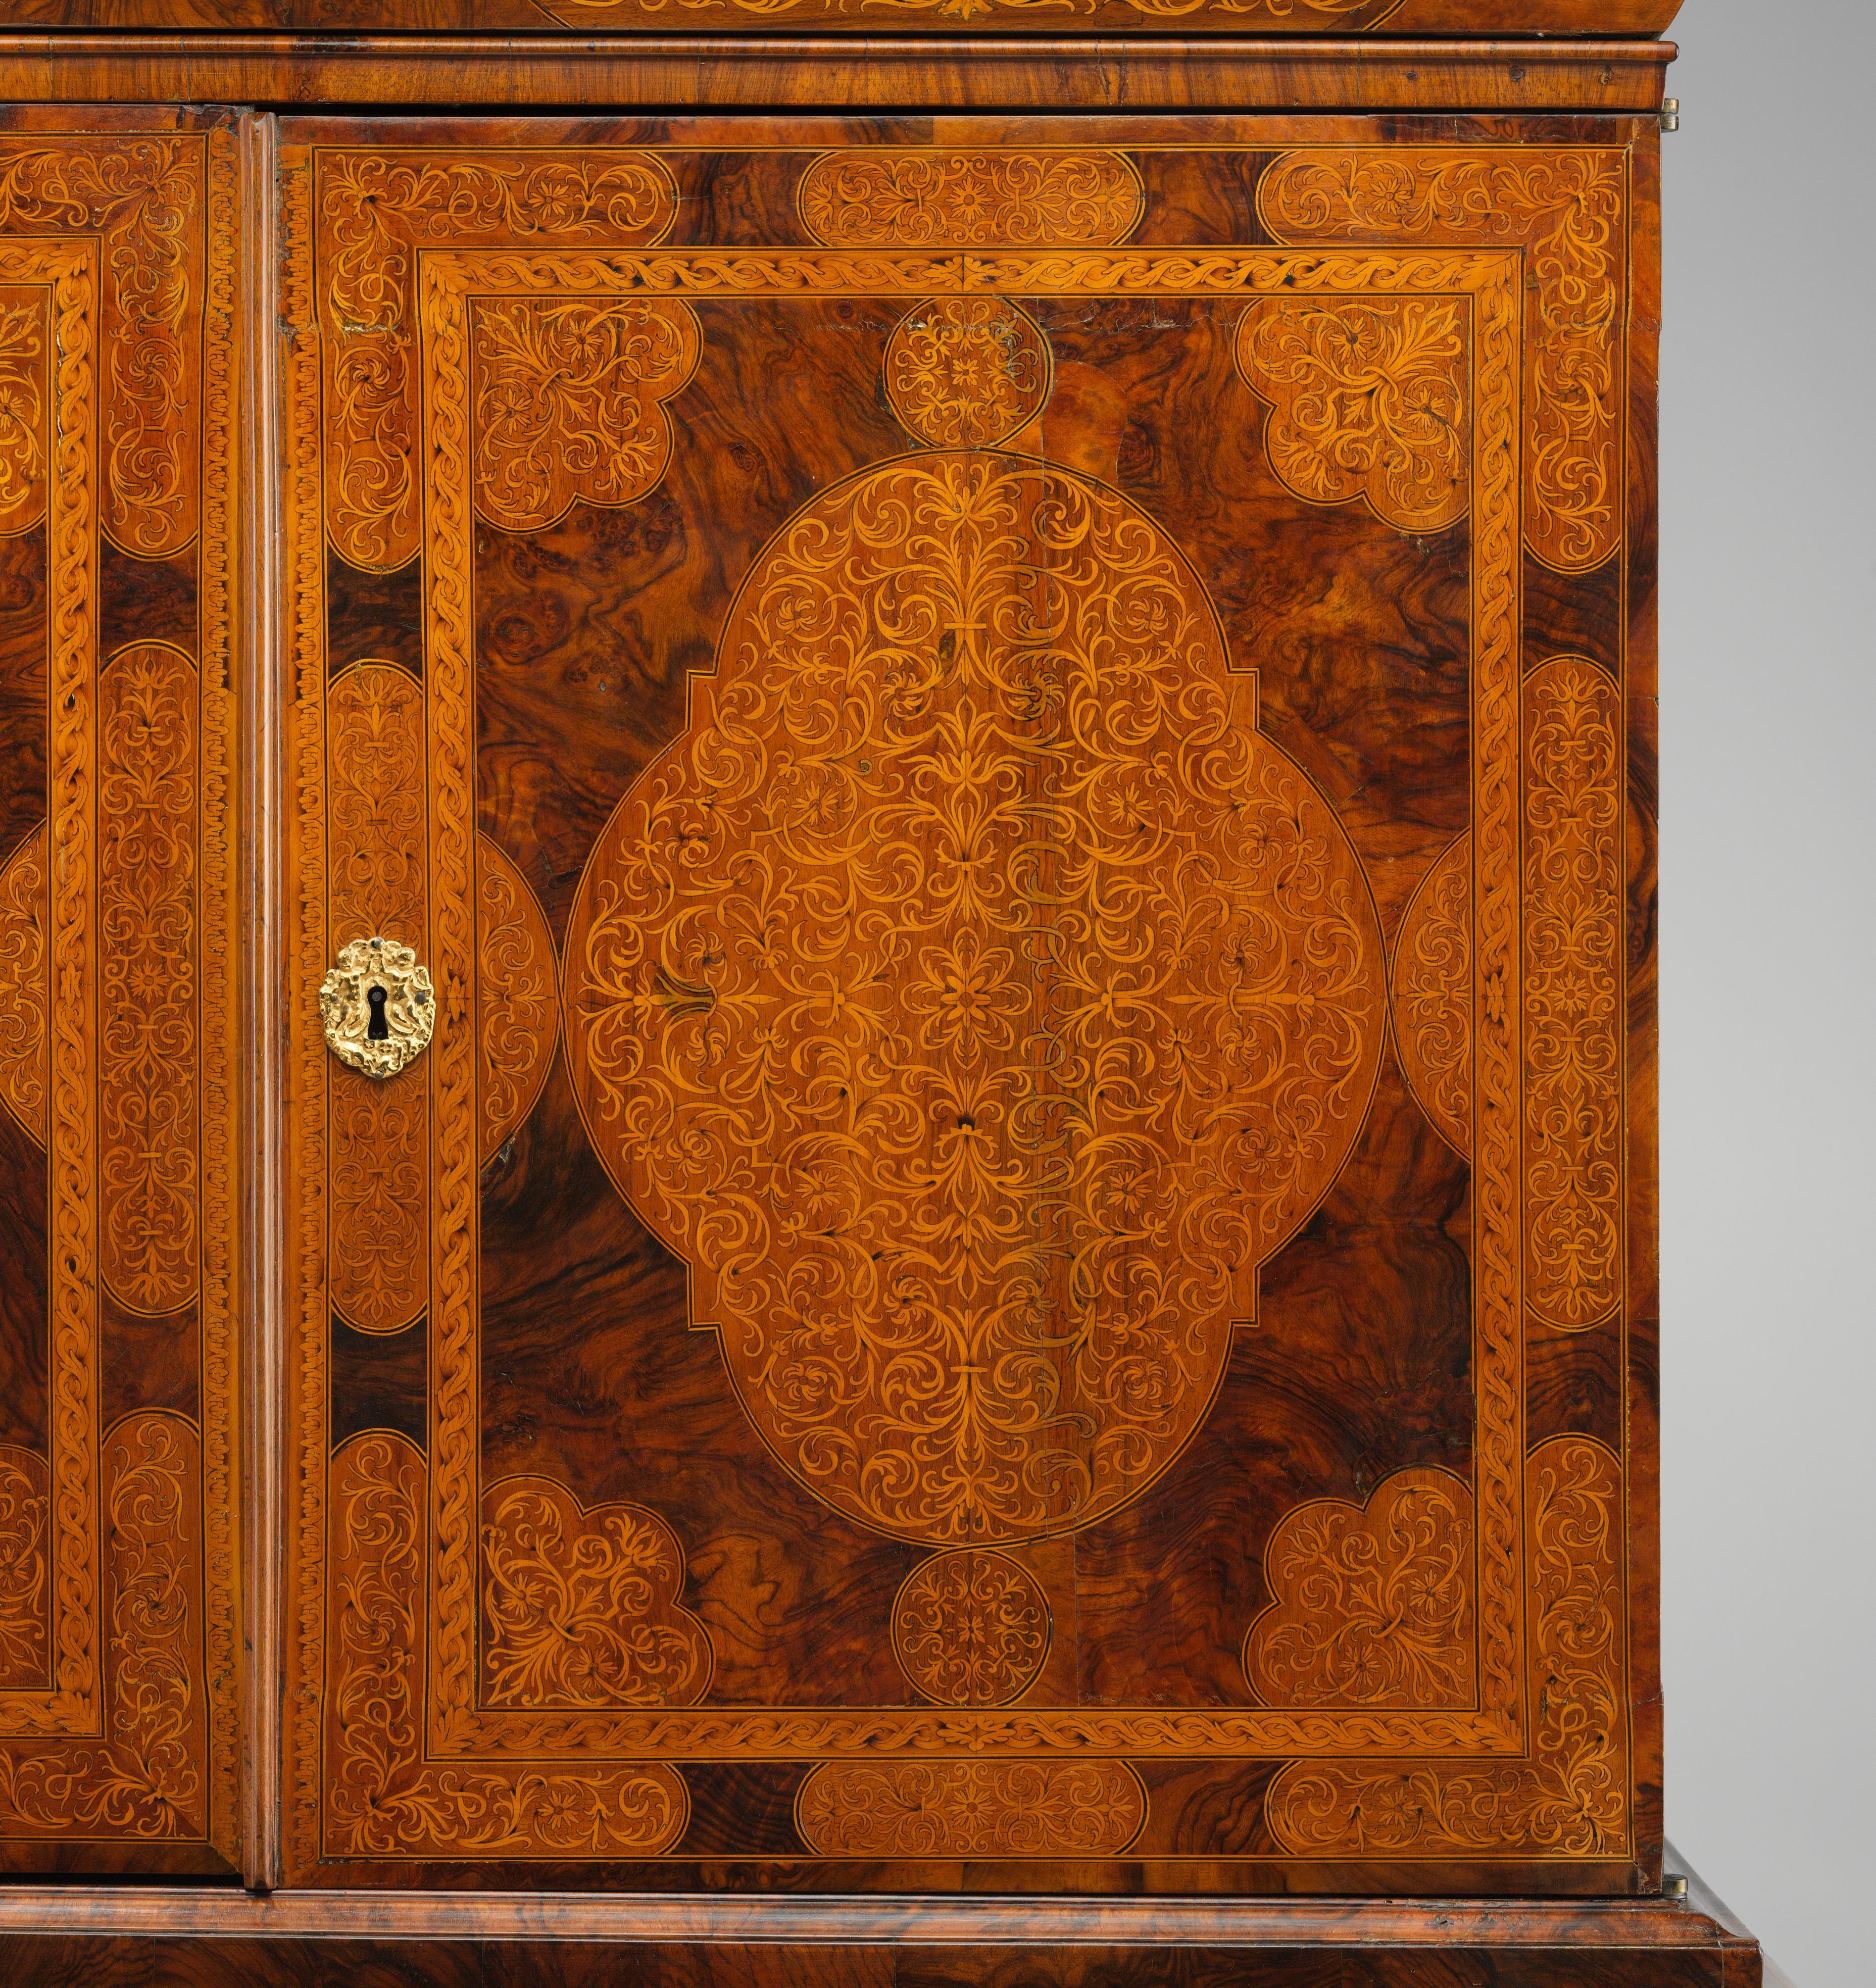 17th Century William & Mary Seaweed Marquetry Inlaid Cabinet by Gerrit Jensen (c. 1634-1715)  For Sale